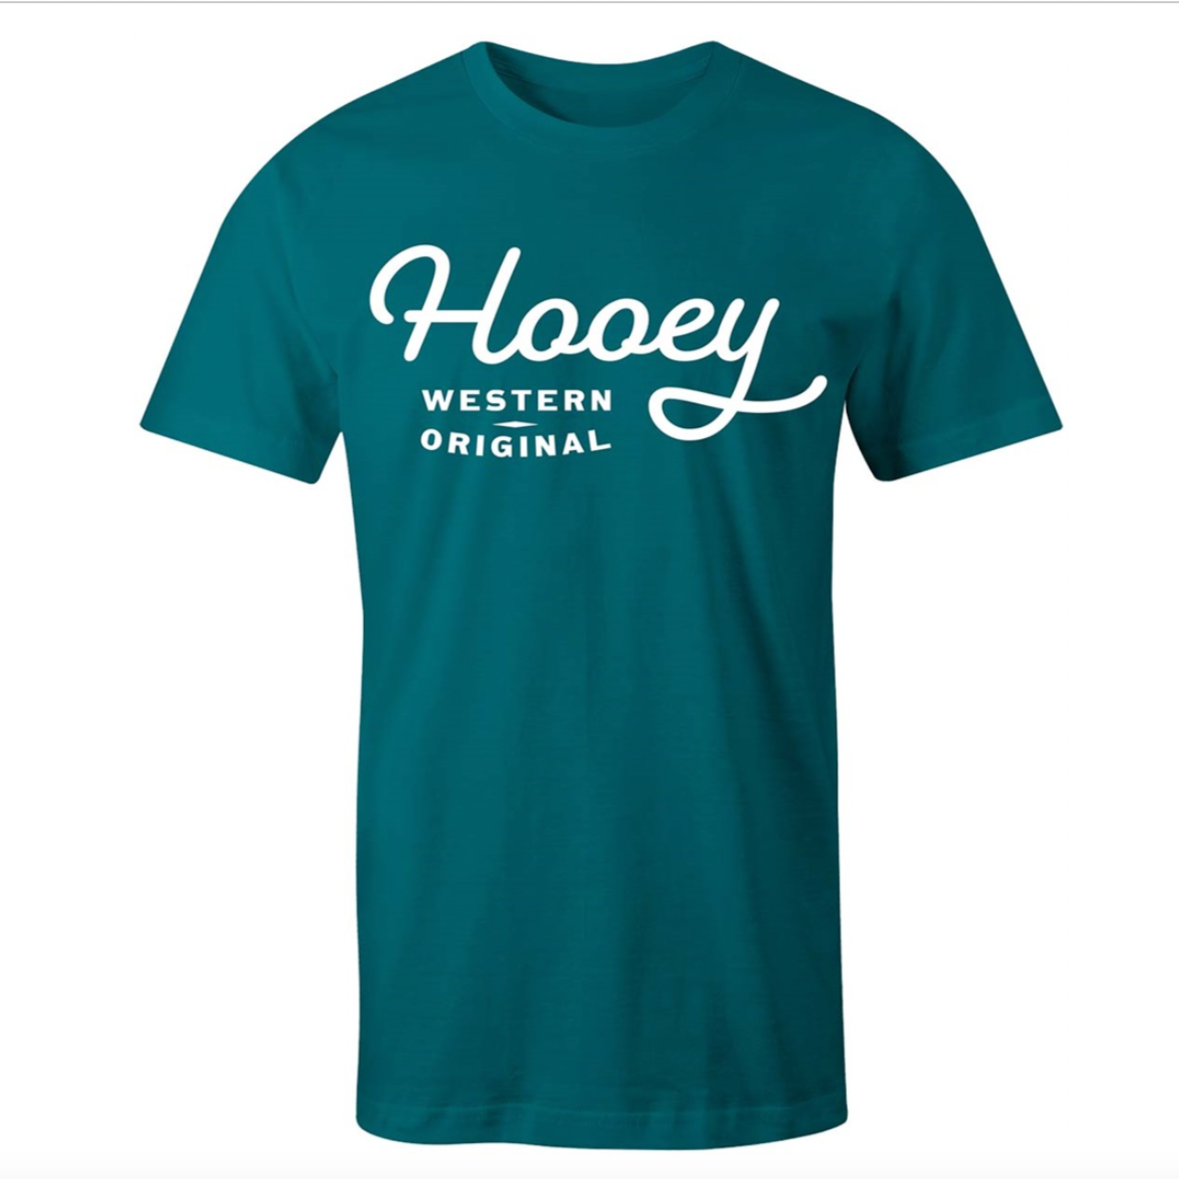 Hooey Youth "OG" Teal Graphic Shirt